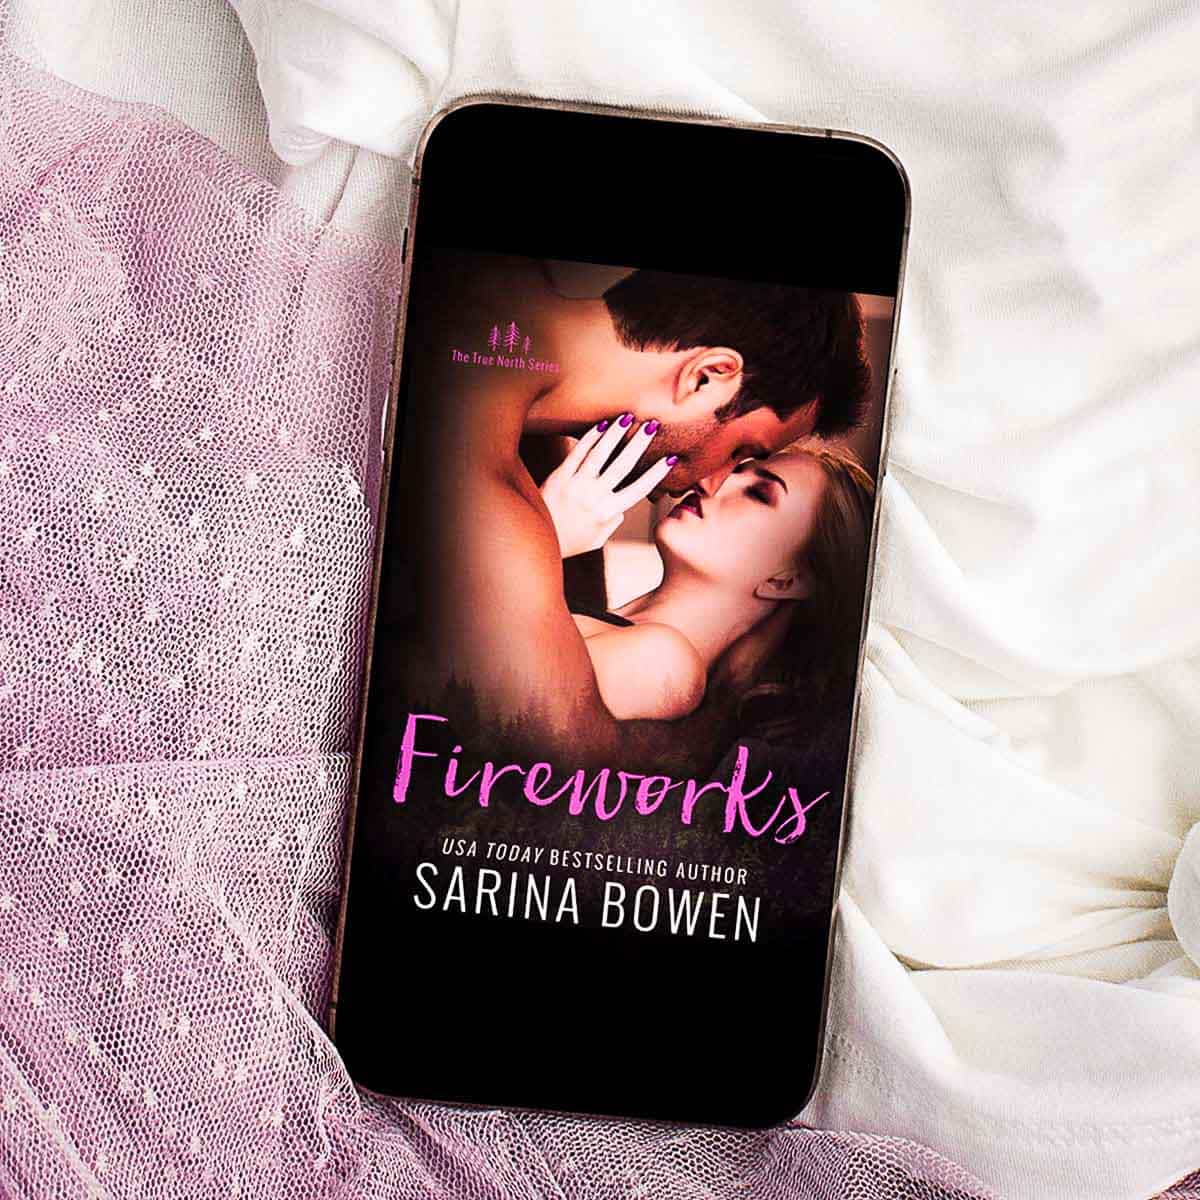 If you’re a fan of unrequited crushes, second-chance romance, or romance with a side of suspense, you’re going to love Fireworks by Sarina Bowen!